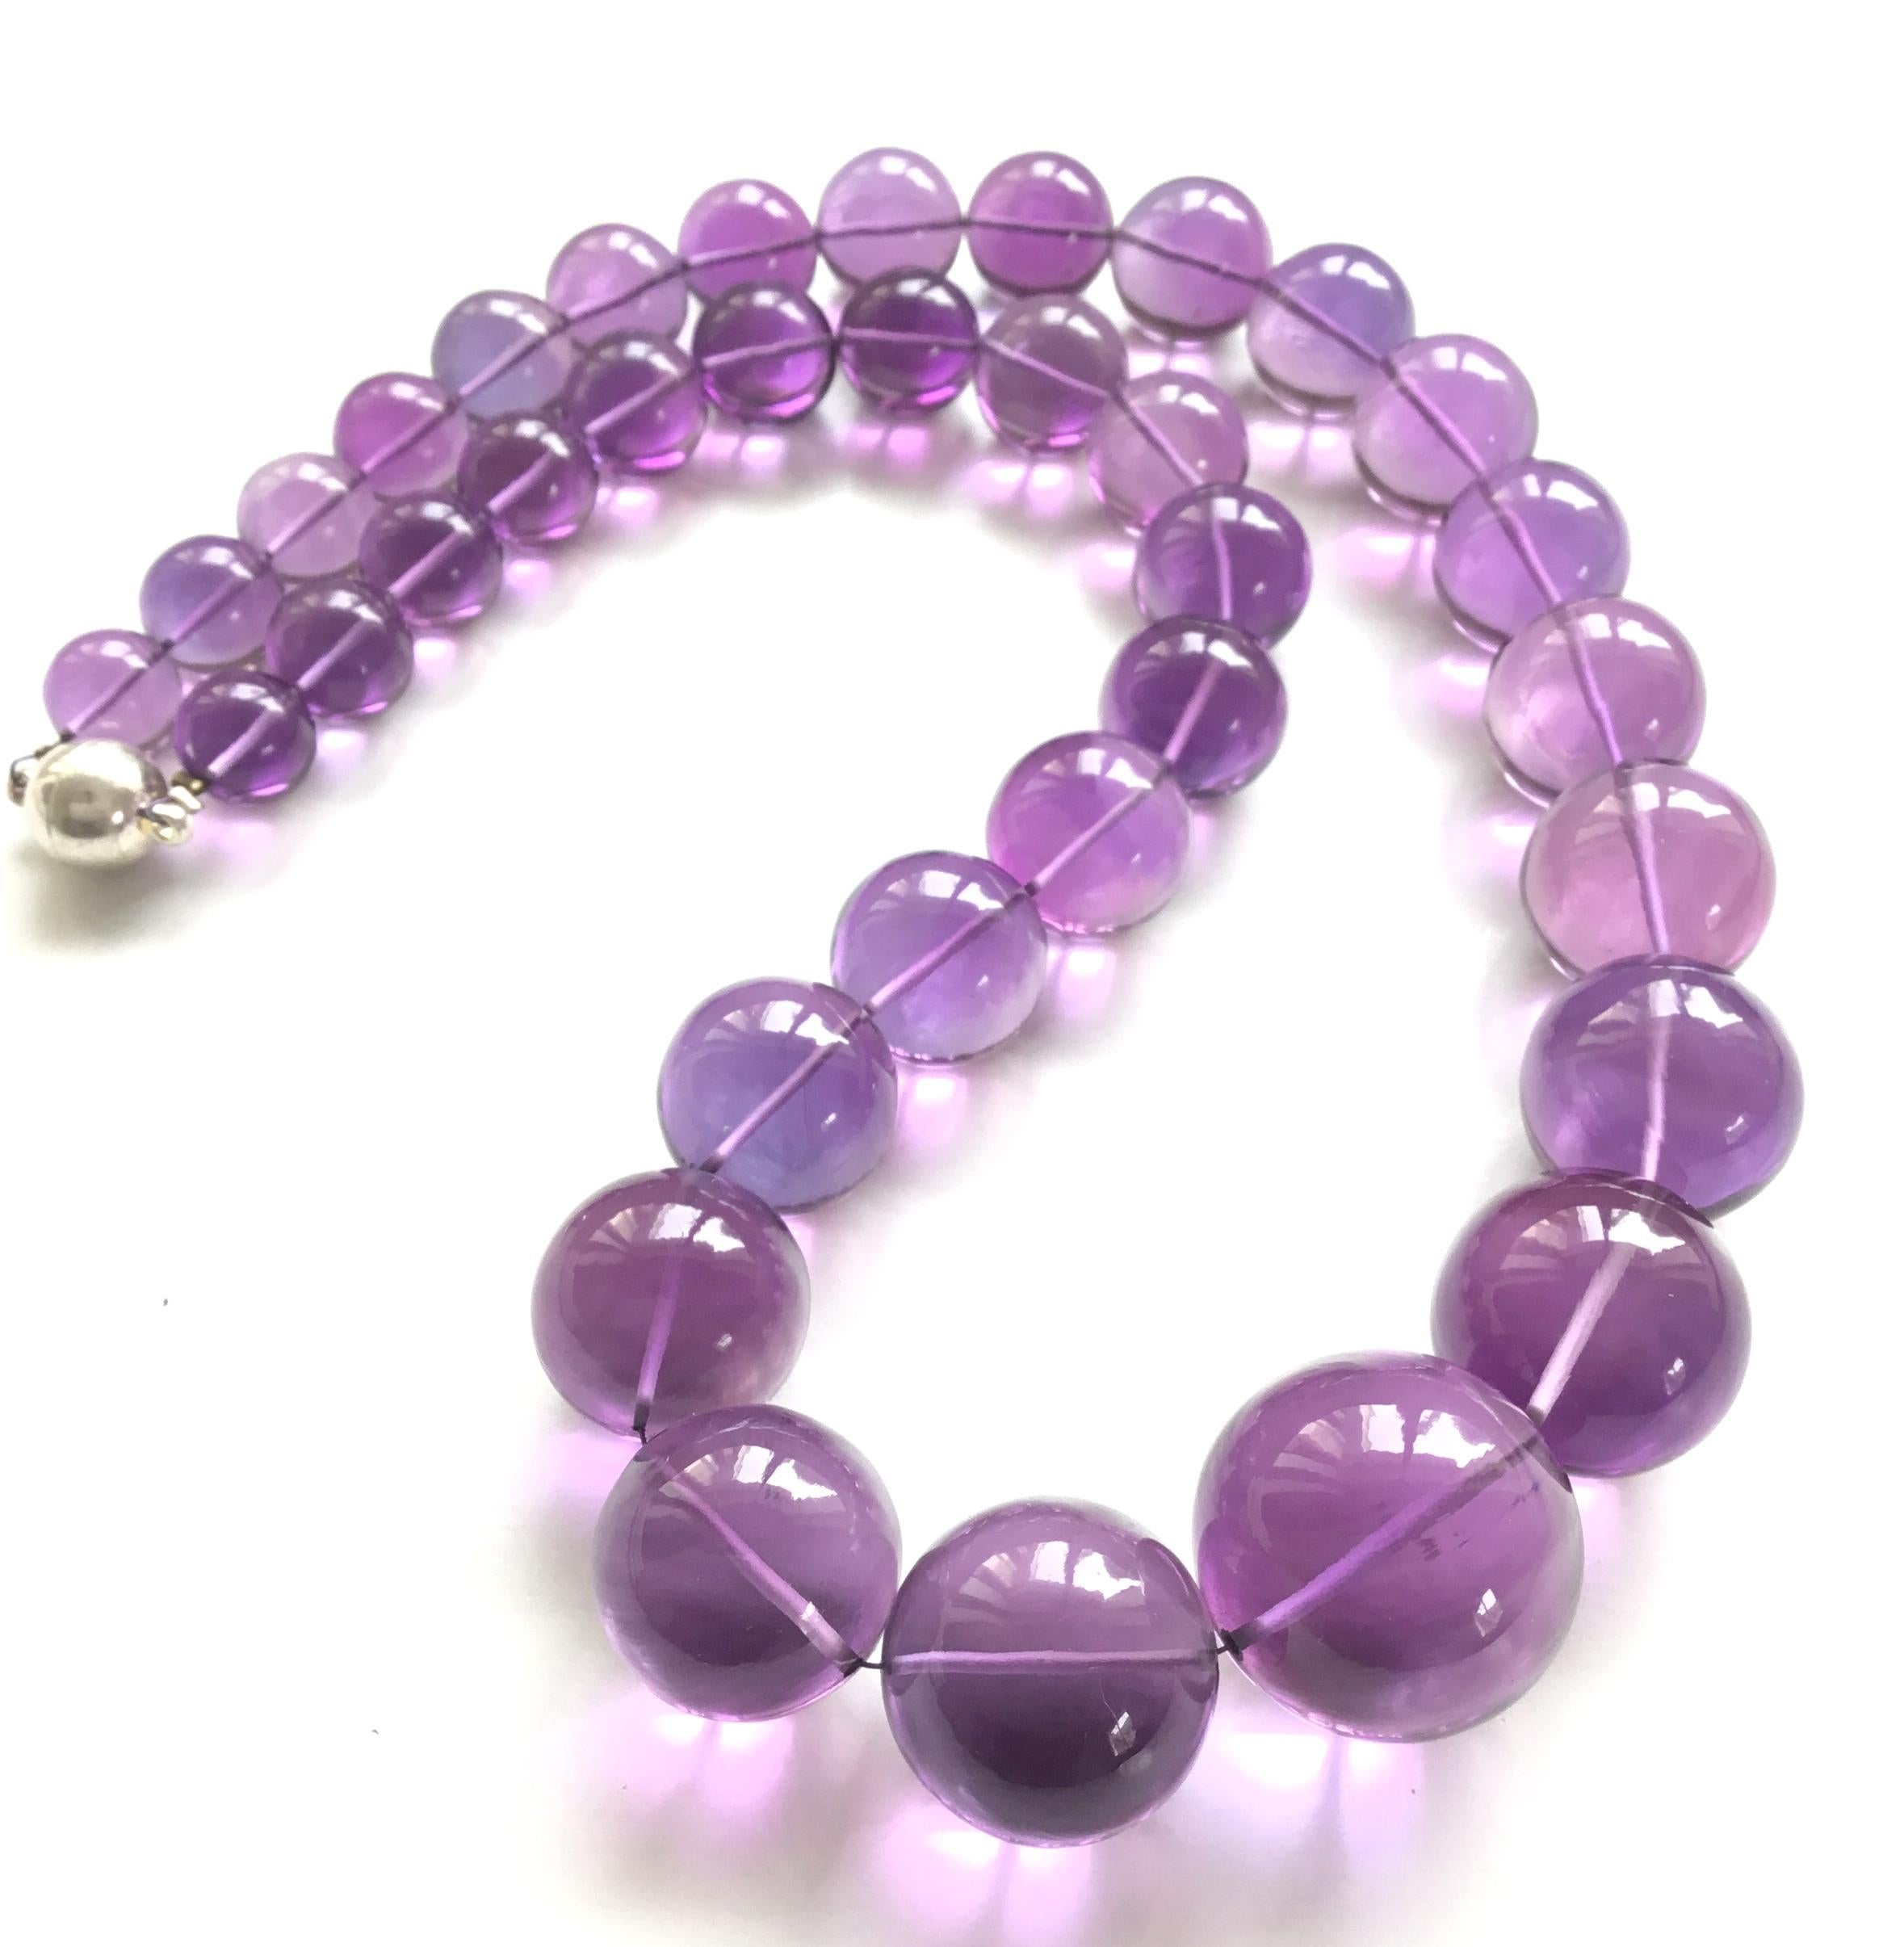 Top Quality Amethyst Balls Necklace Loupe Clean For Sale 2